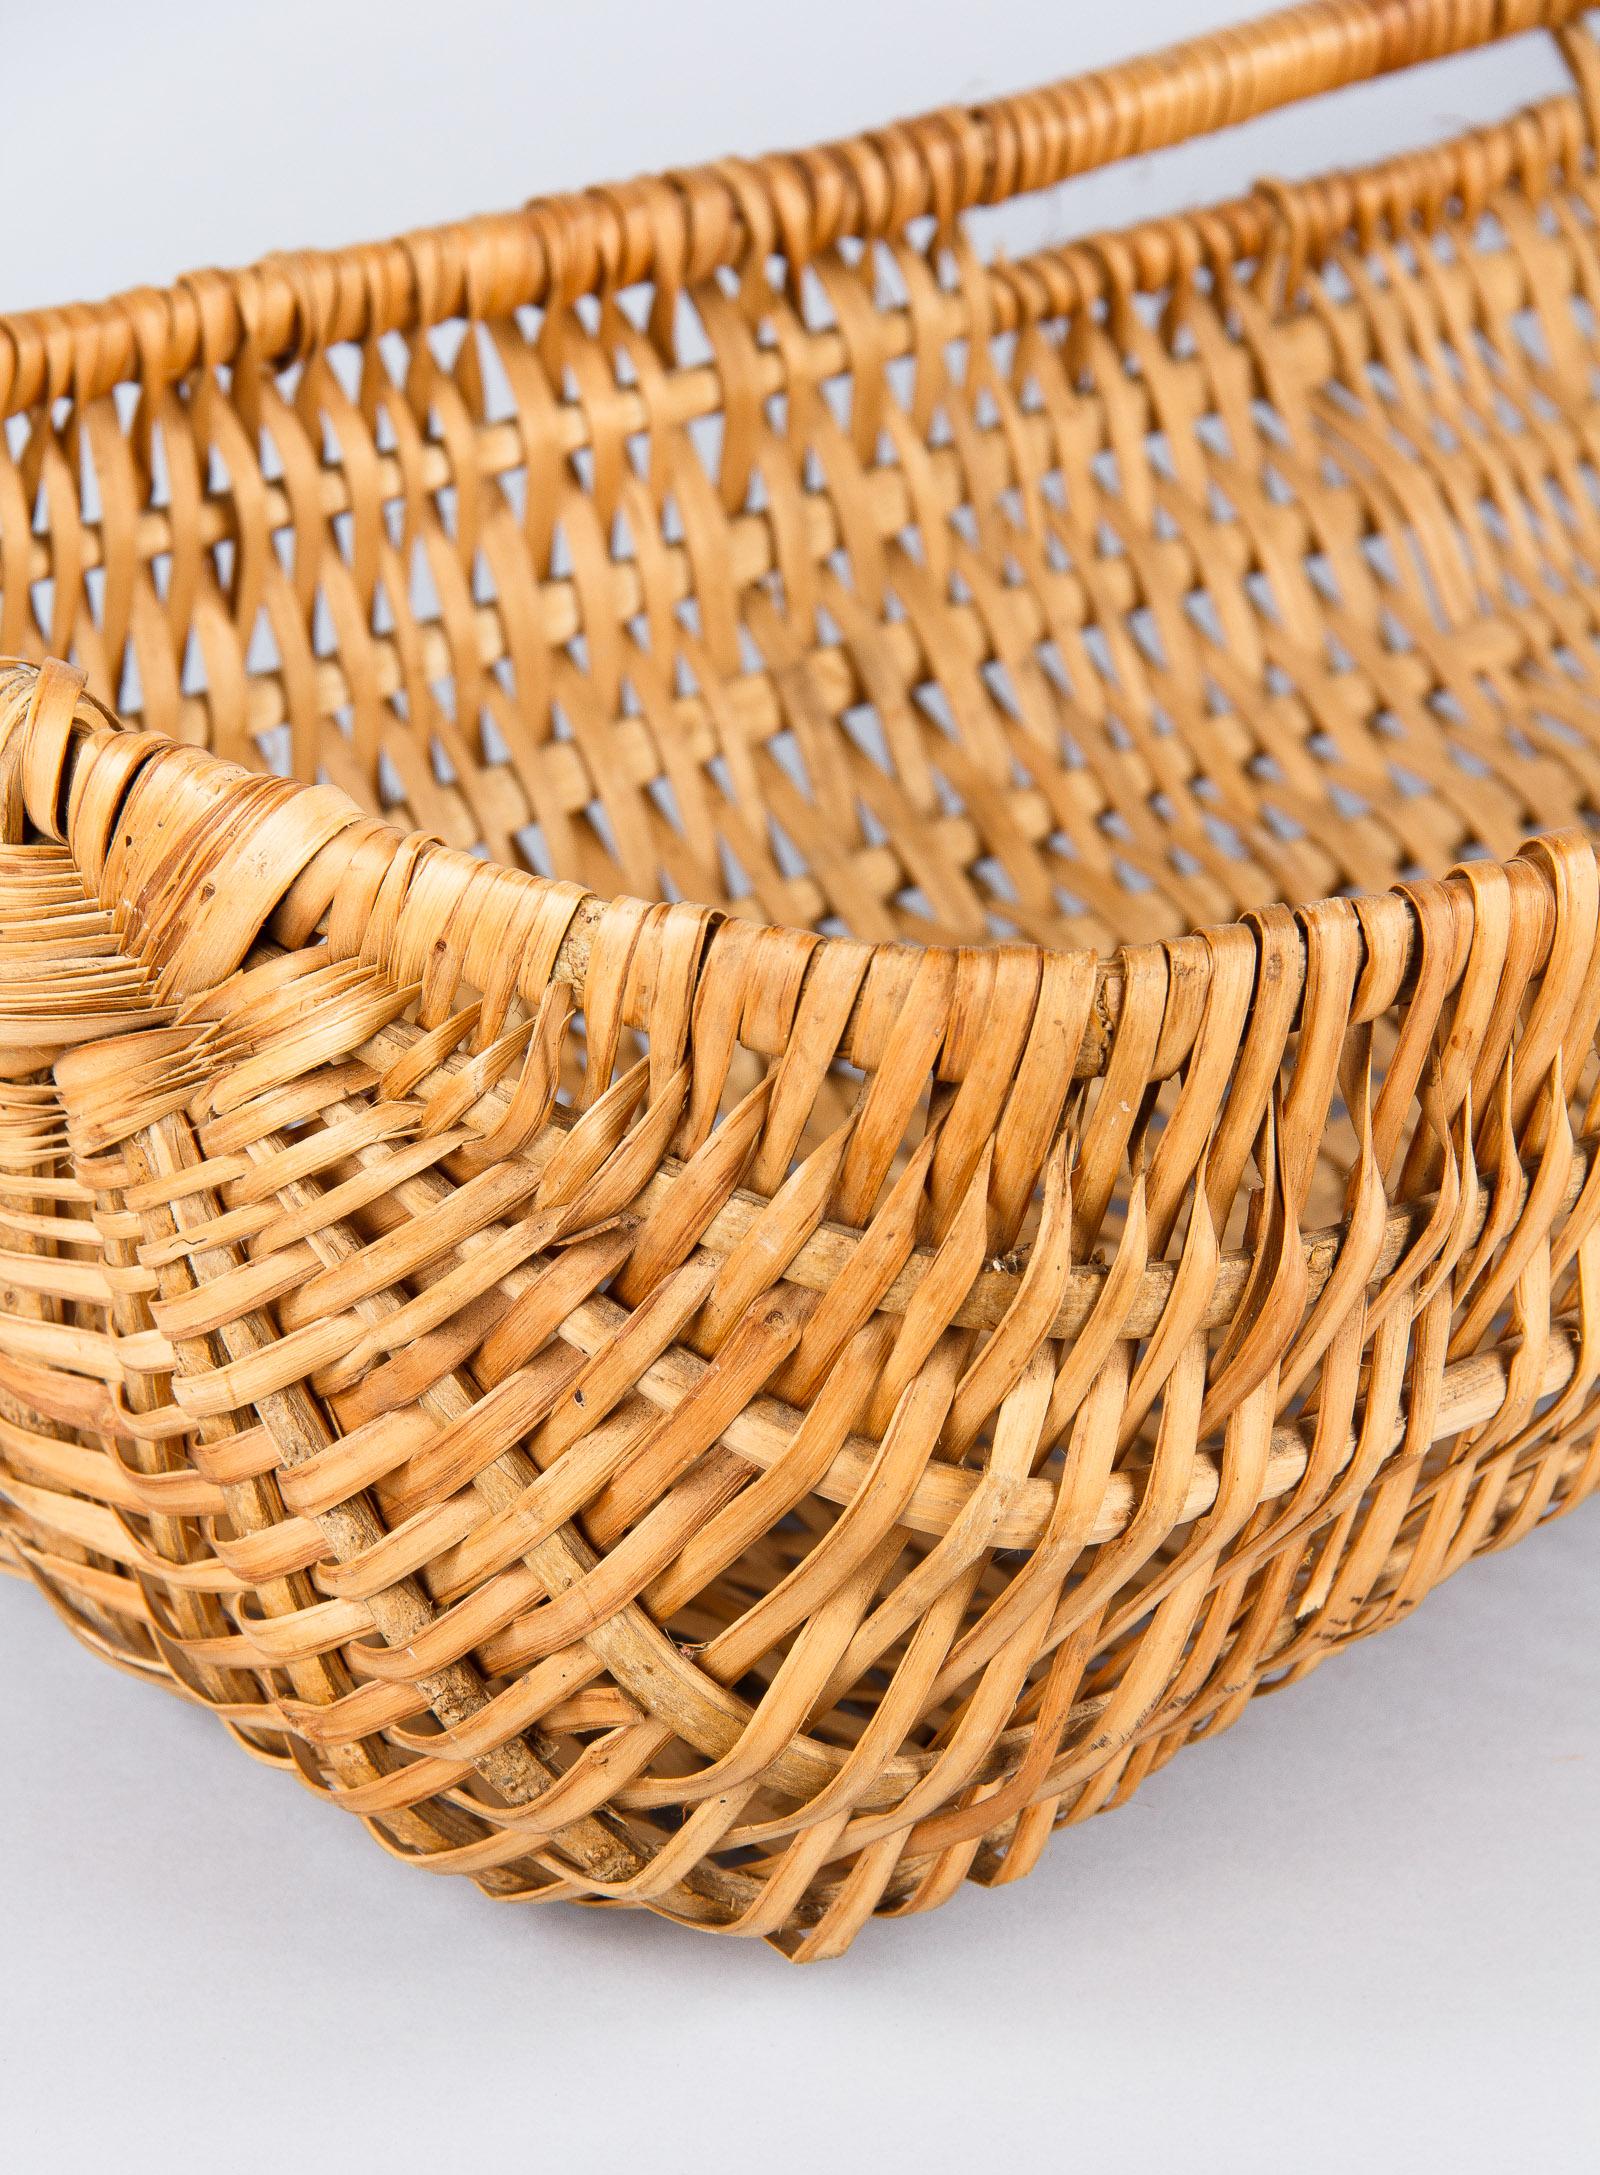 Country Vintage French Wicker Basket from Auvergne Region